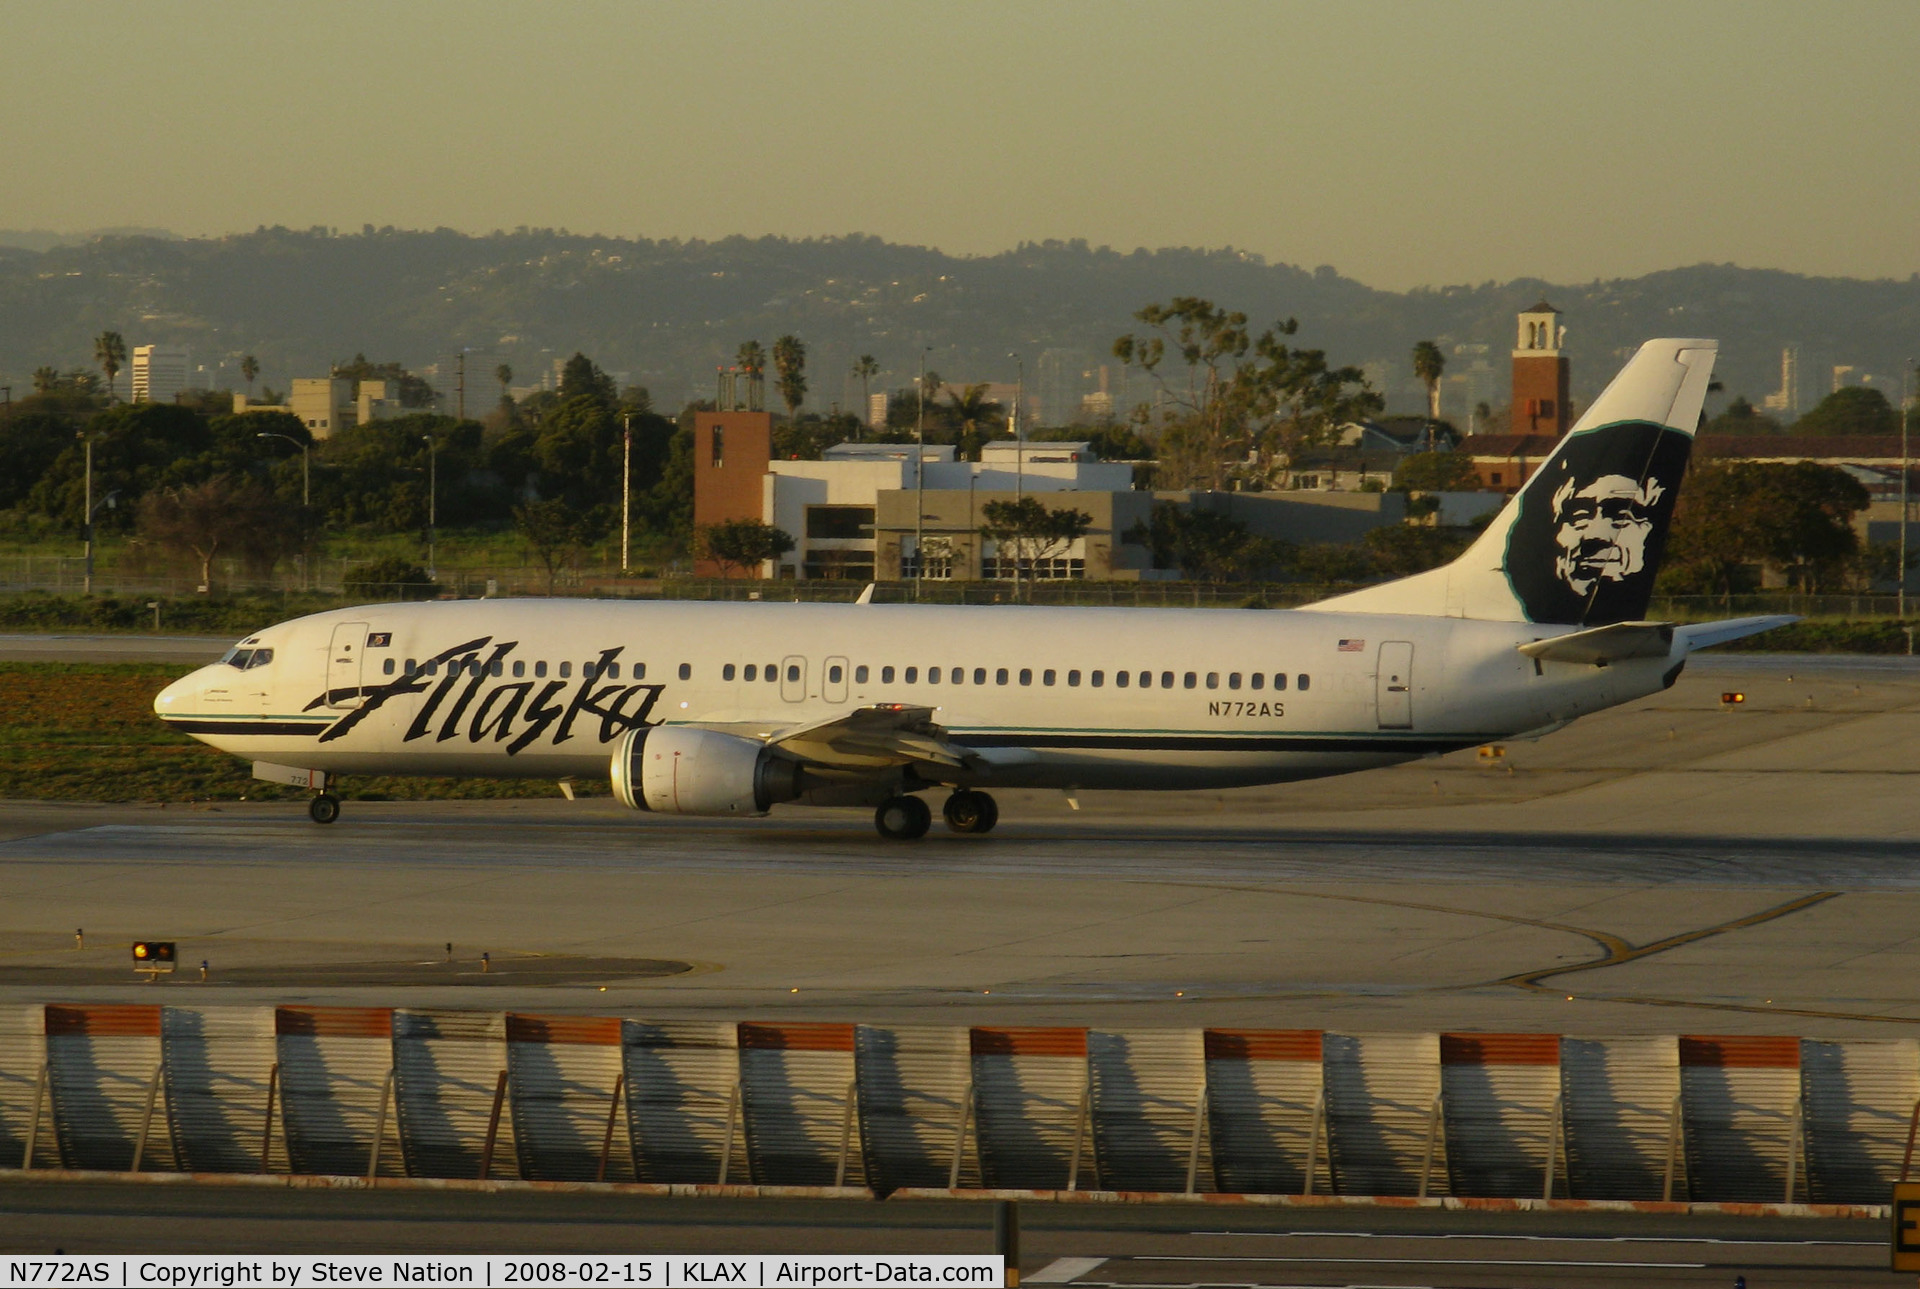 N772AS, 1993 Boeing 737-4Q8 C/N 25105, Alaska Airlines 1993 747-4Q8 lined up for takeoff @ Los Angeles International Airport, CA